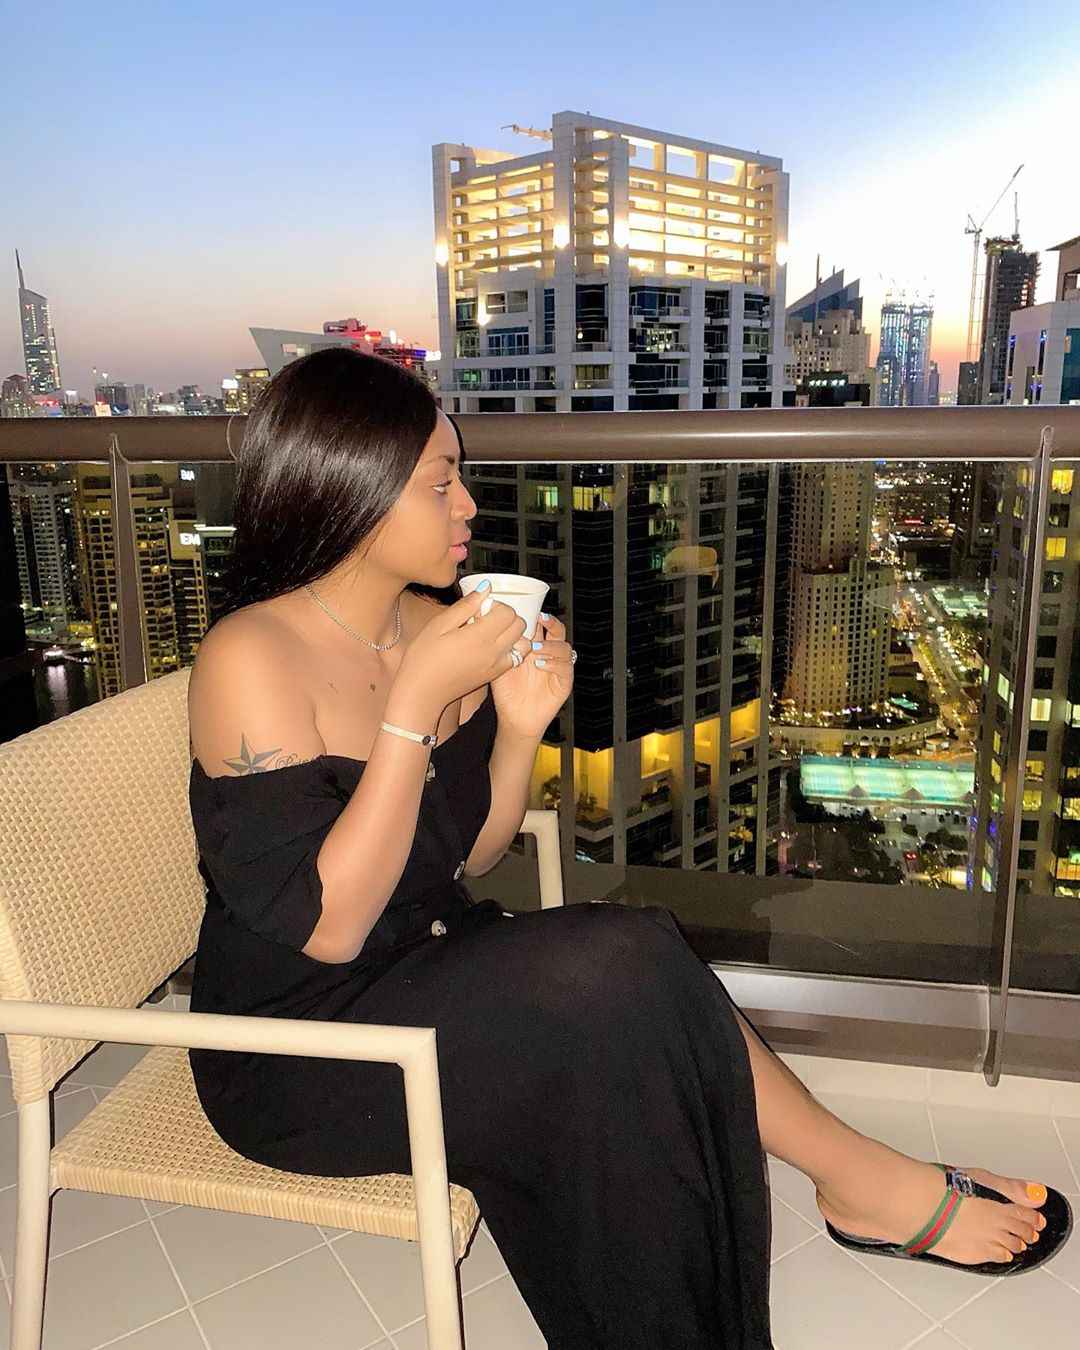 Regina Daniels Looks Like The Wife of a Billionaire in These New Photos  %Post Title